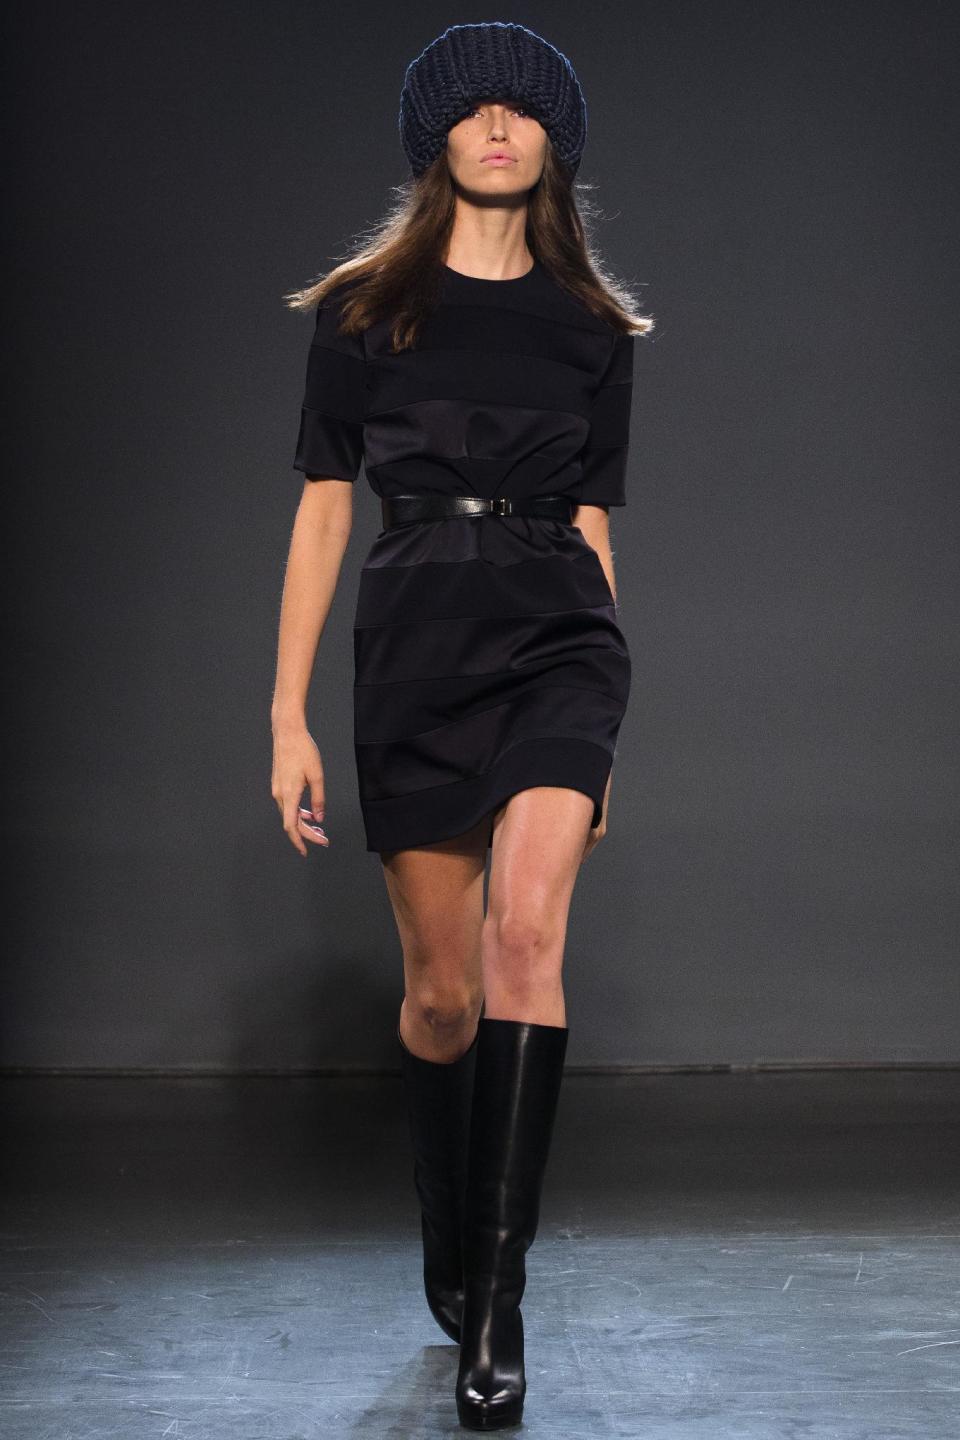 The Victoria, Victoria Beckham Fall 2013 collection is modeled during Fashion Week in New York on Tuesday, Feb. 12, 2013. (AP Photo/John Minchillo)